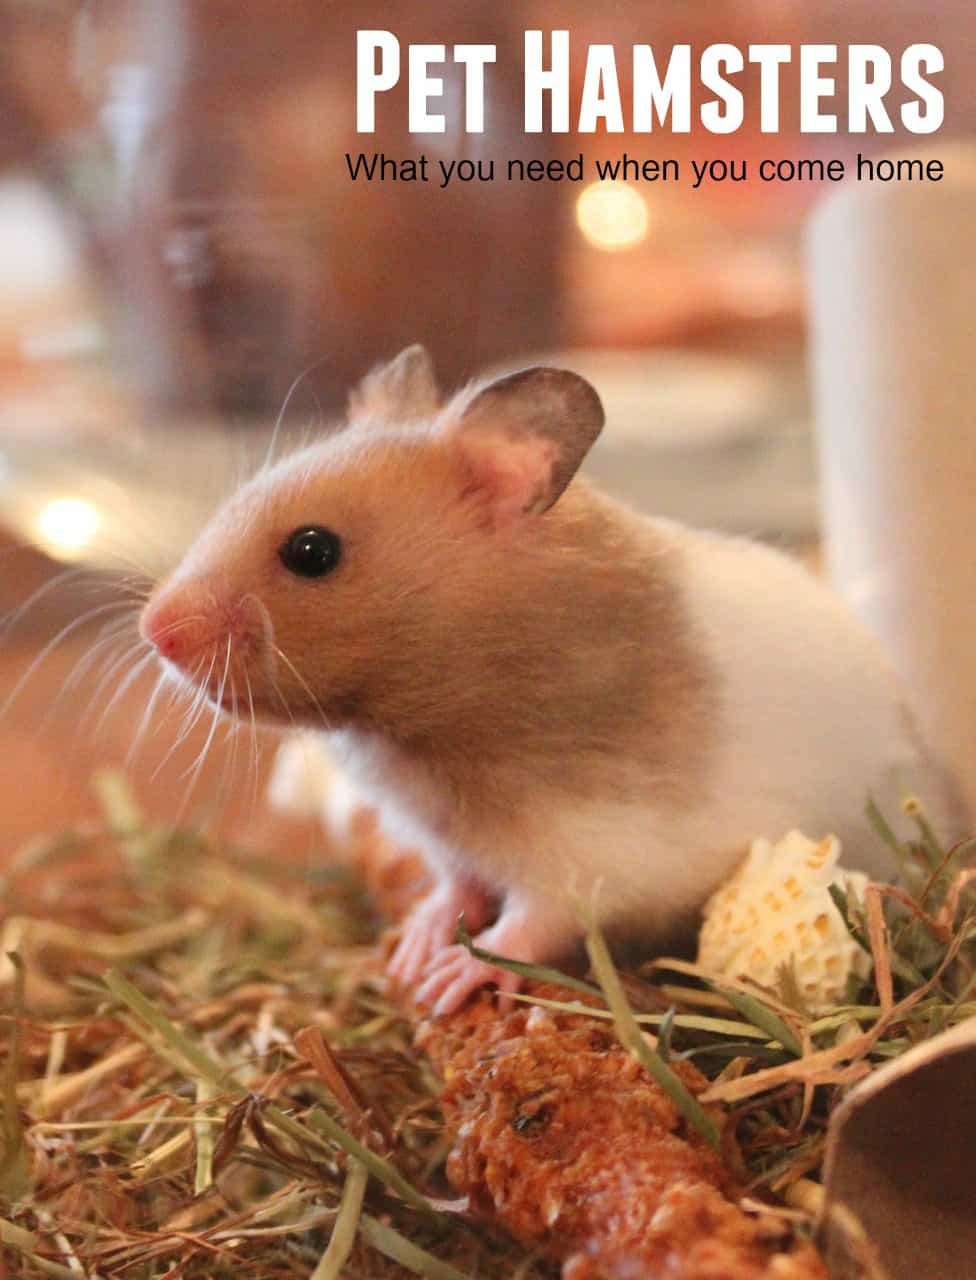 Everything you need to bring home your first hamster